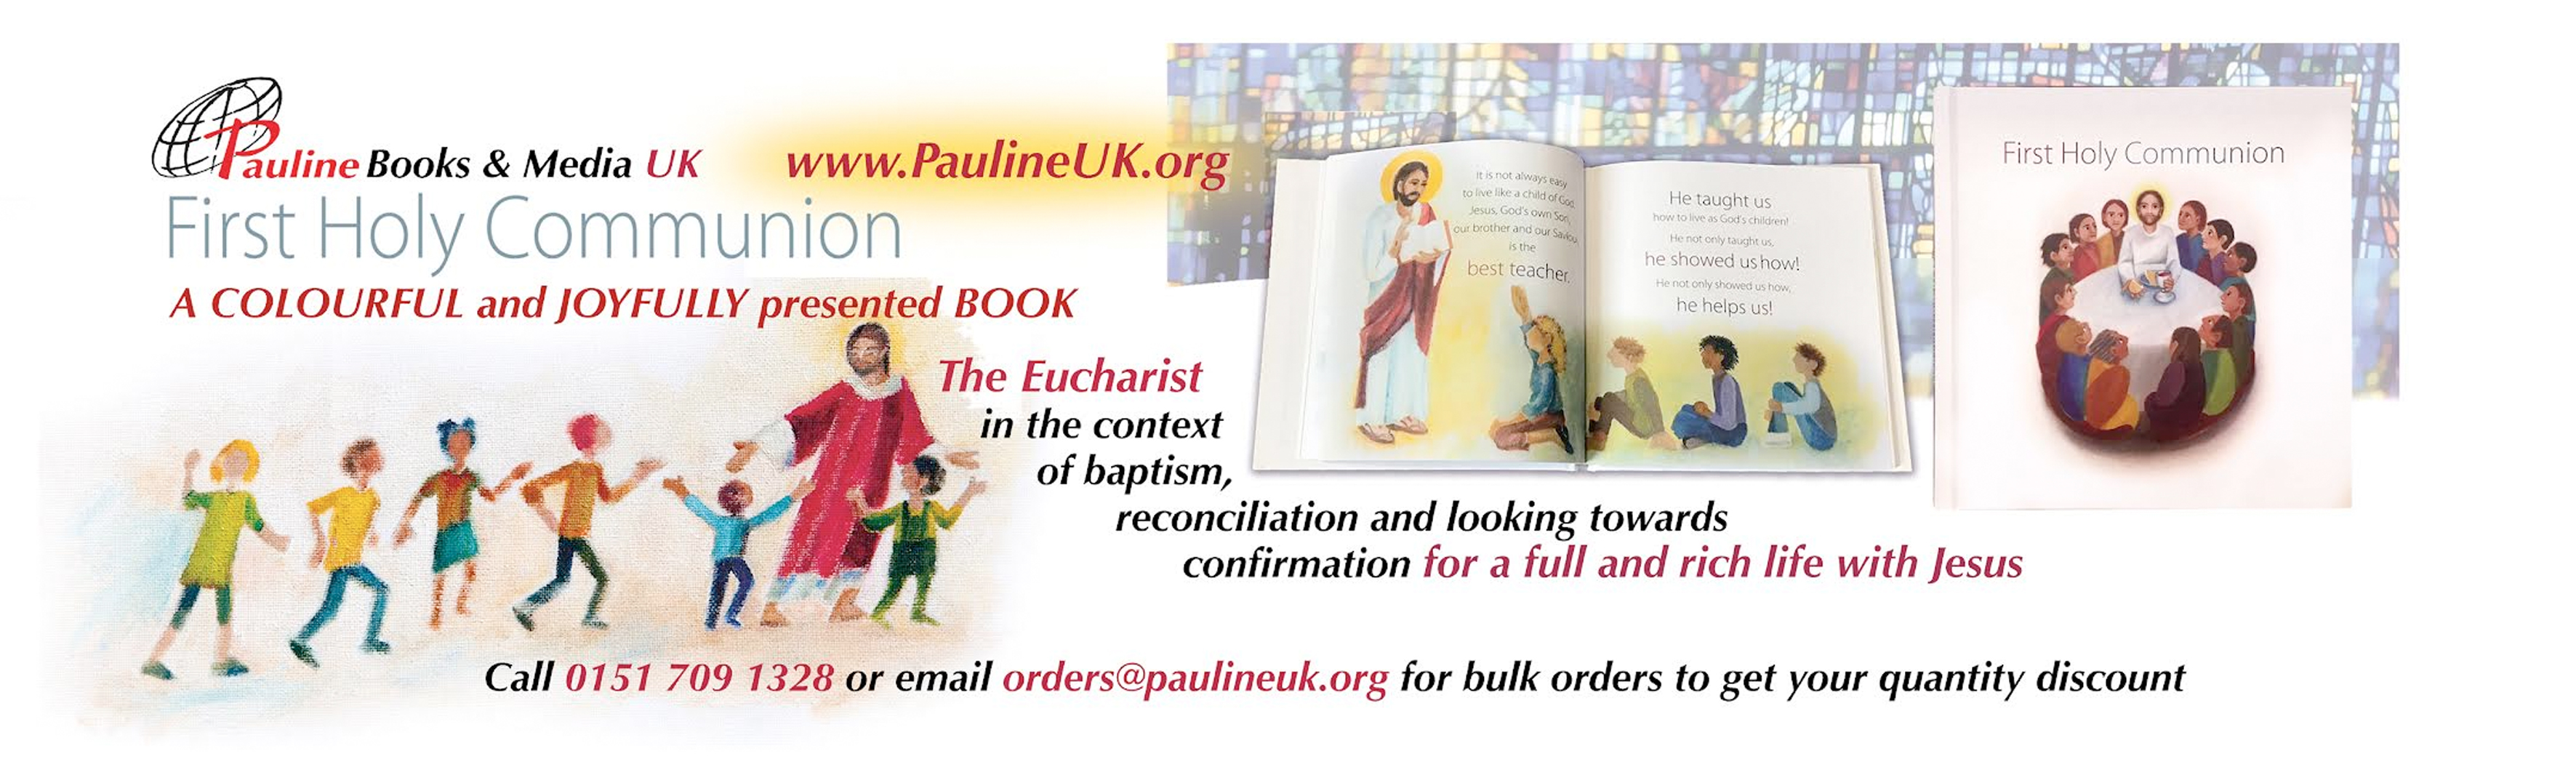 First Holy Communion Book